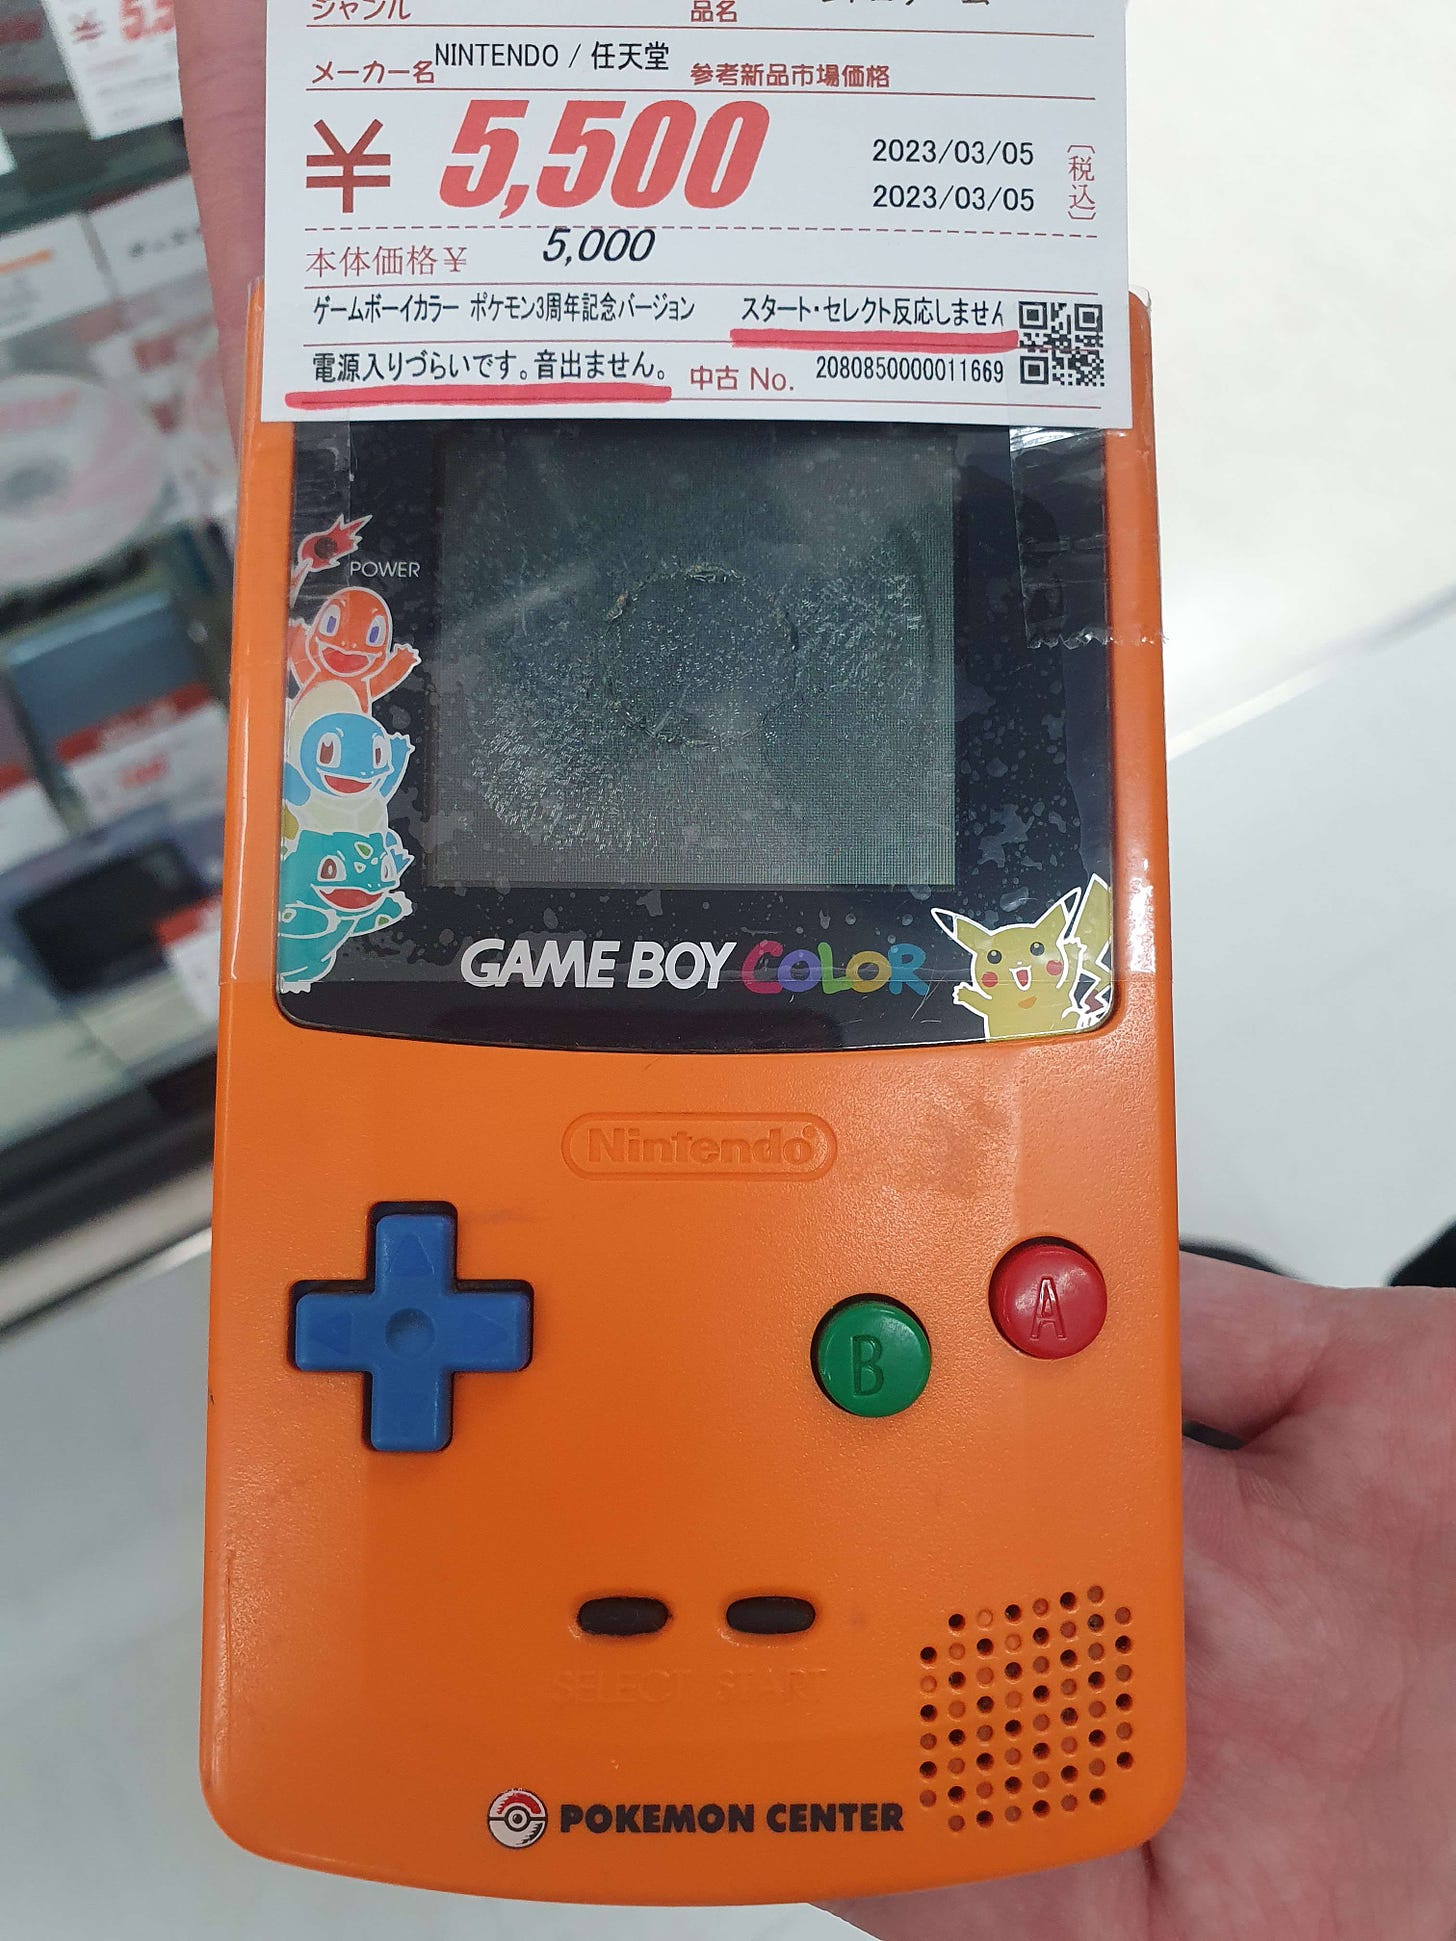 This very rare Game Boy Color is a striking orange, with Red, Blue and Green buttons, featuring Charmander, Squirtle, Bulbasaur and Pikachu. It's a shame that this one was broken...